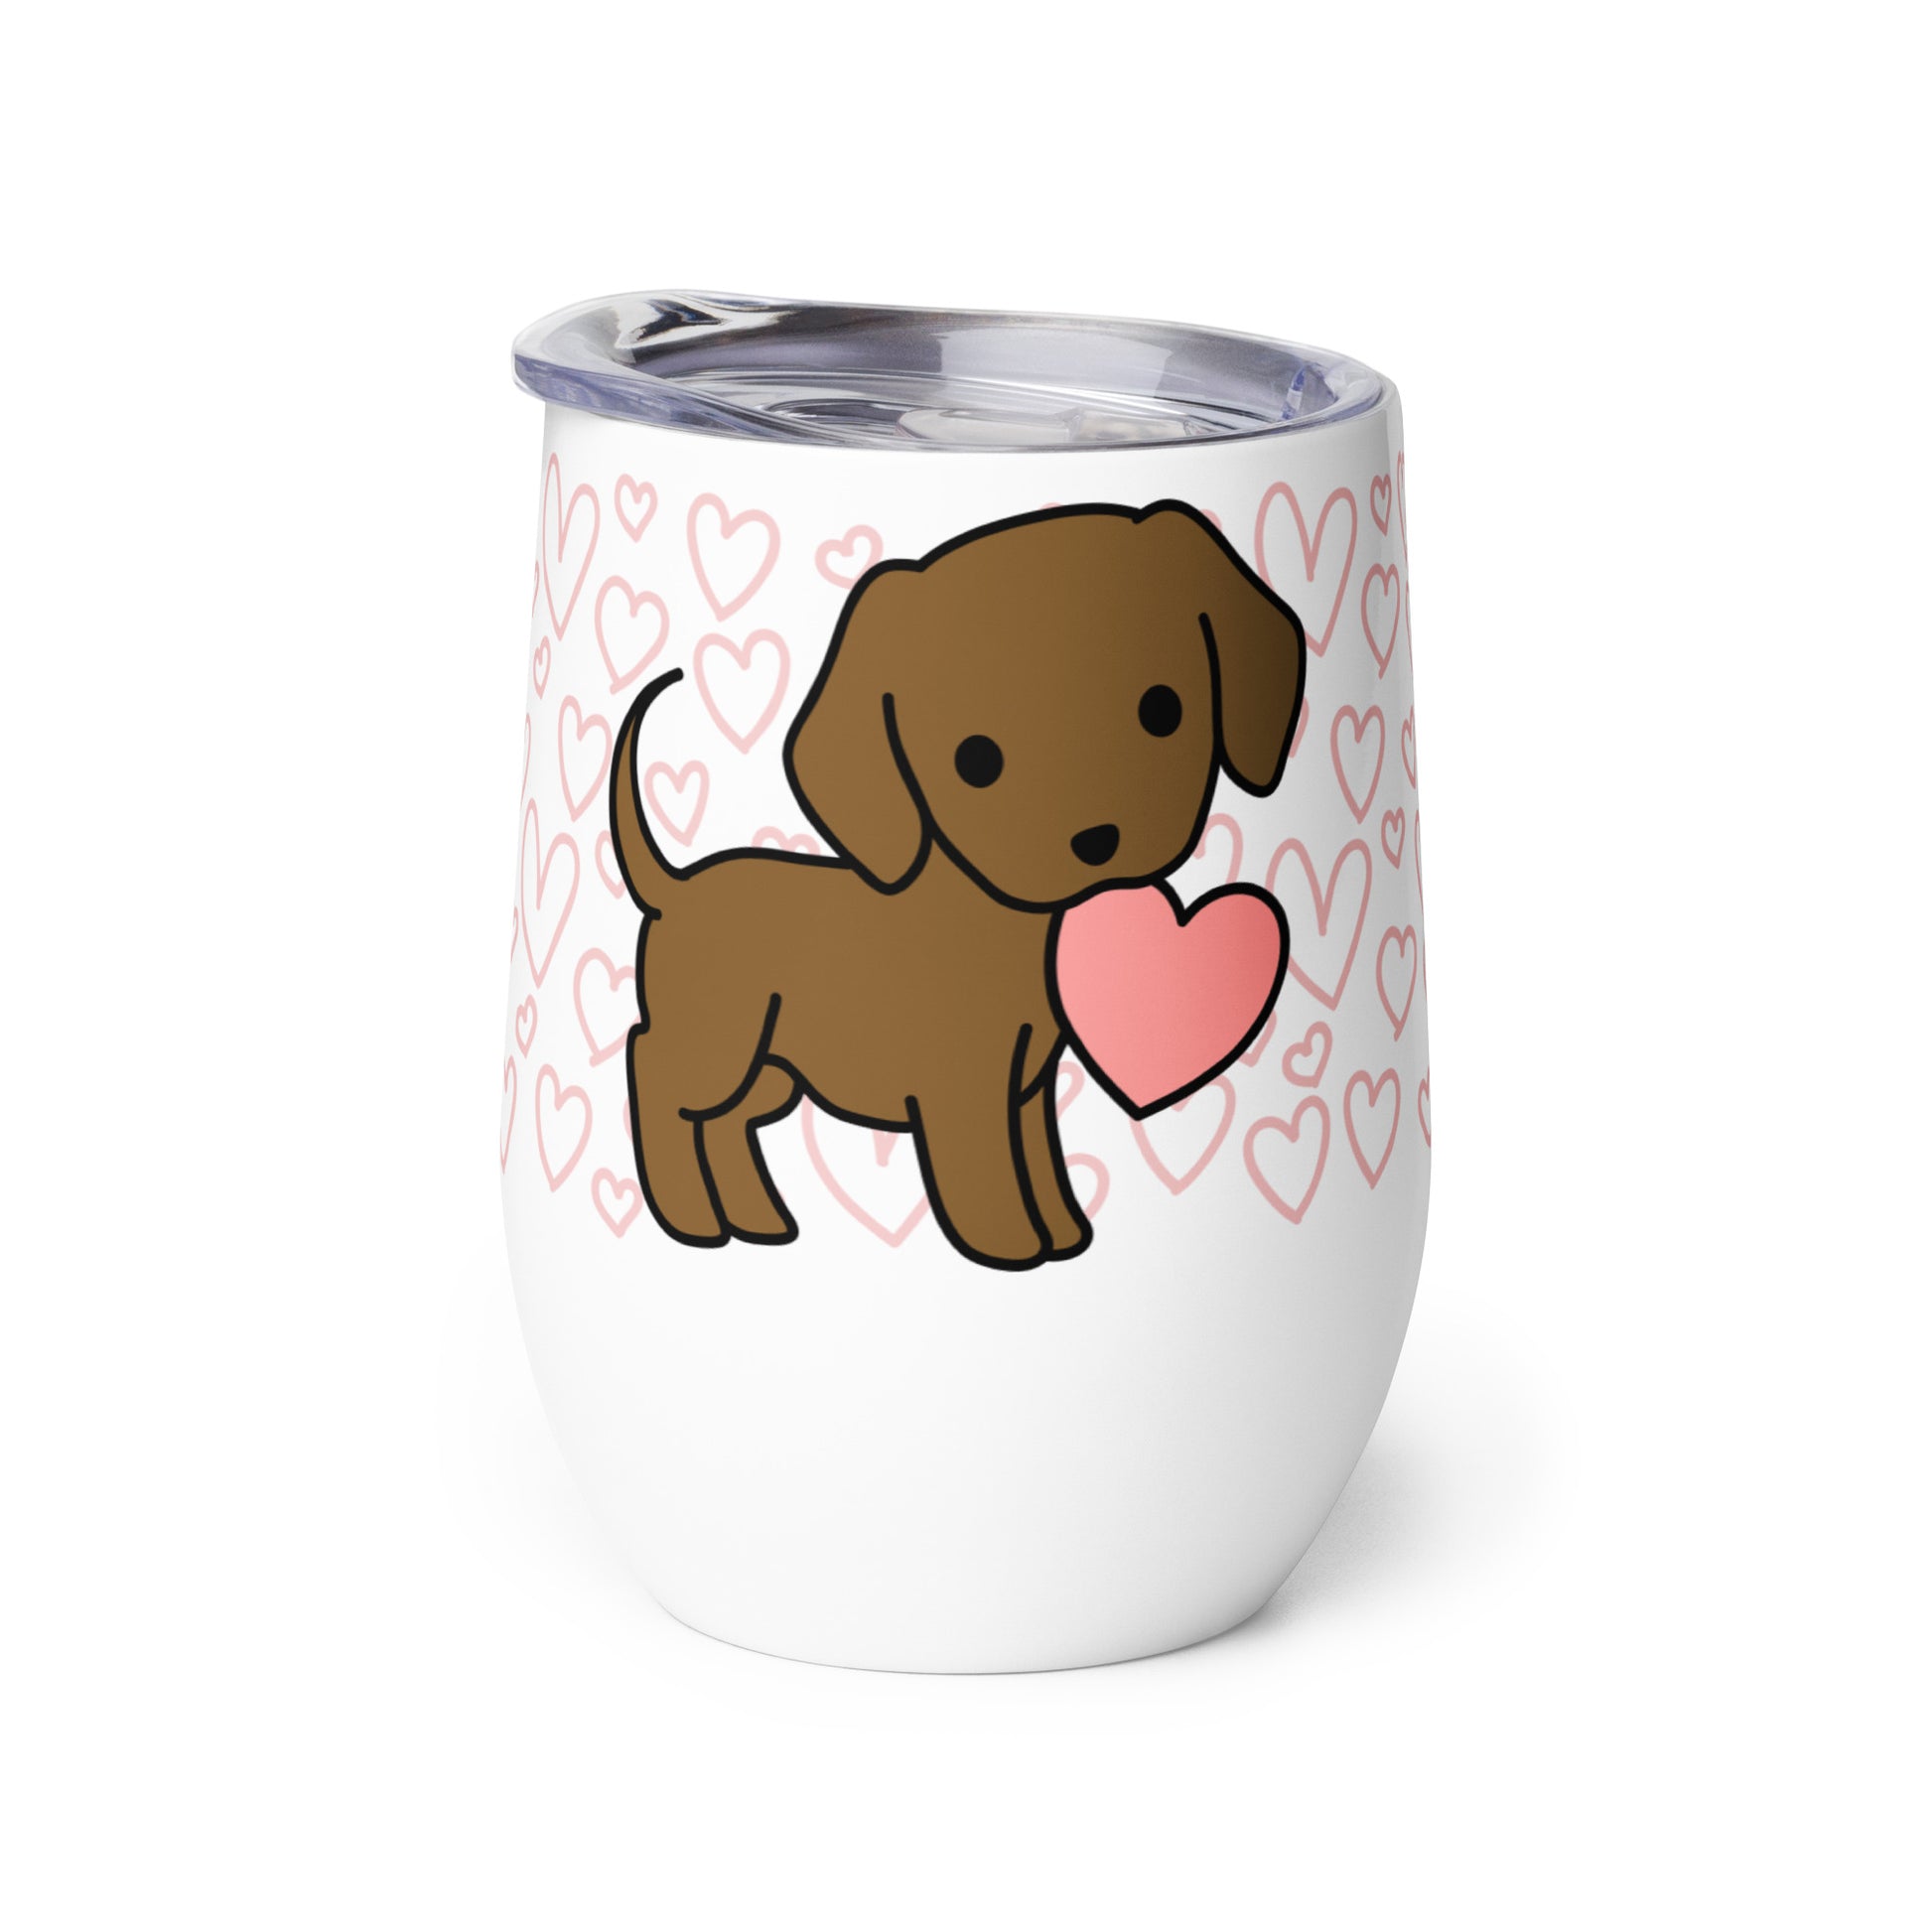 A white metal wine tumbler with a plastic lid. A pattern of hearts wraps around the top half of the tumbler. Centered on the tumbler is a cute, stylized illustration of a Chocolate Lab.